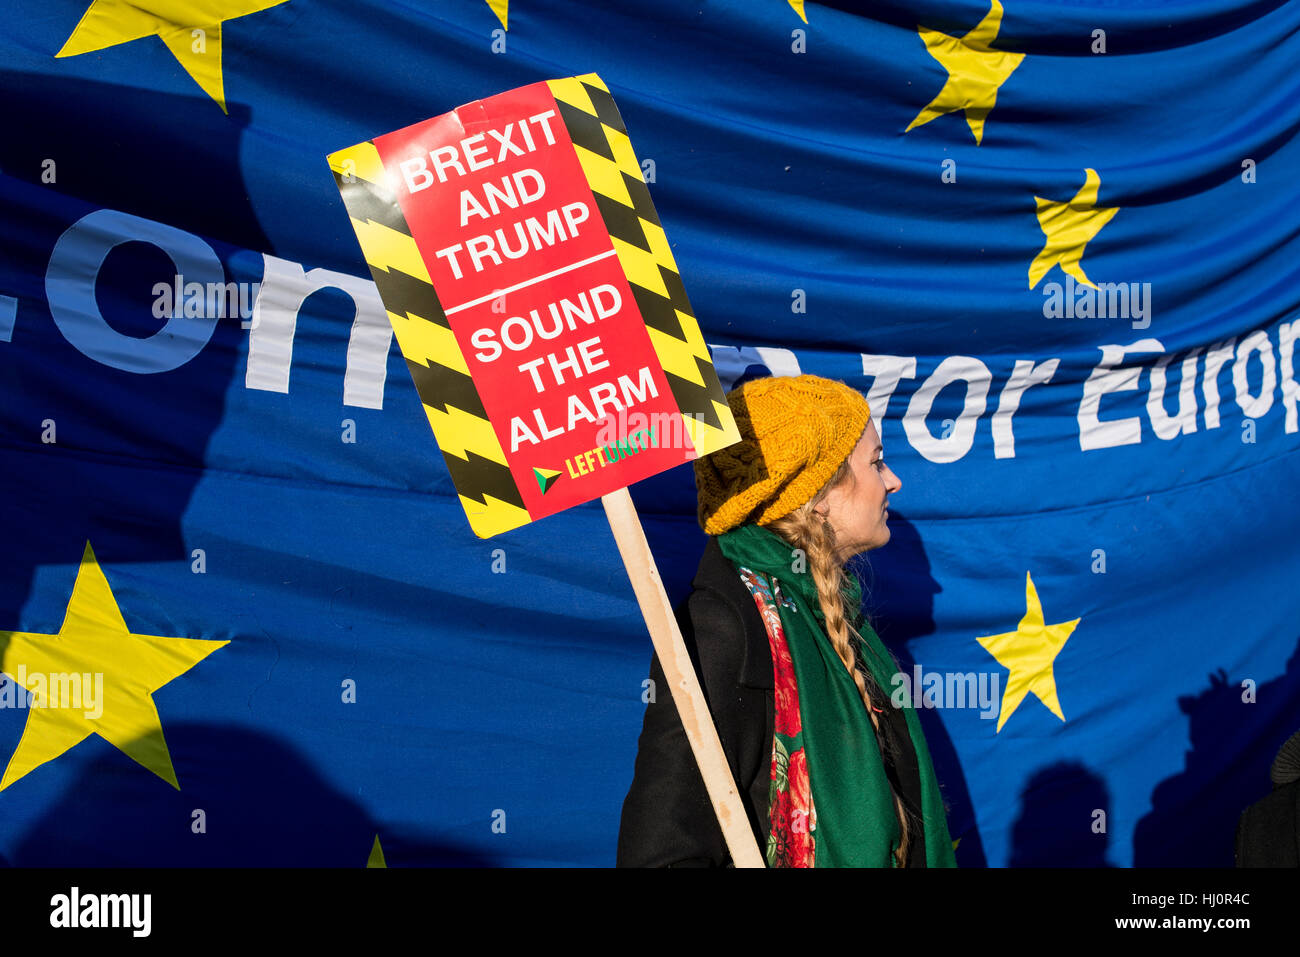 London, UK - 21 January 2017. Protesters holding anti brexit and anti Trump sign standing in front of EU flag.Thousands of protesters gathered in Trafalgar Square to attend Women's March against Donald Trump calling for human rights and equality. Stock Photo